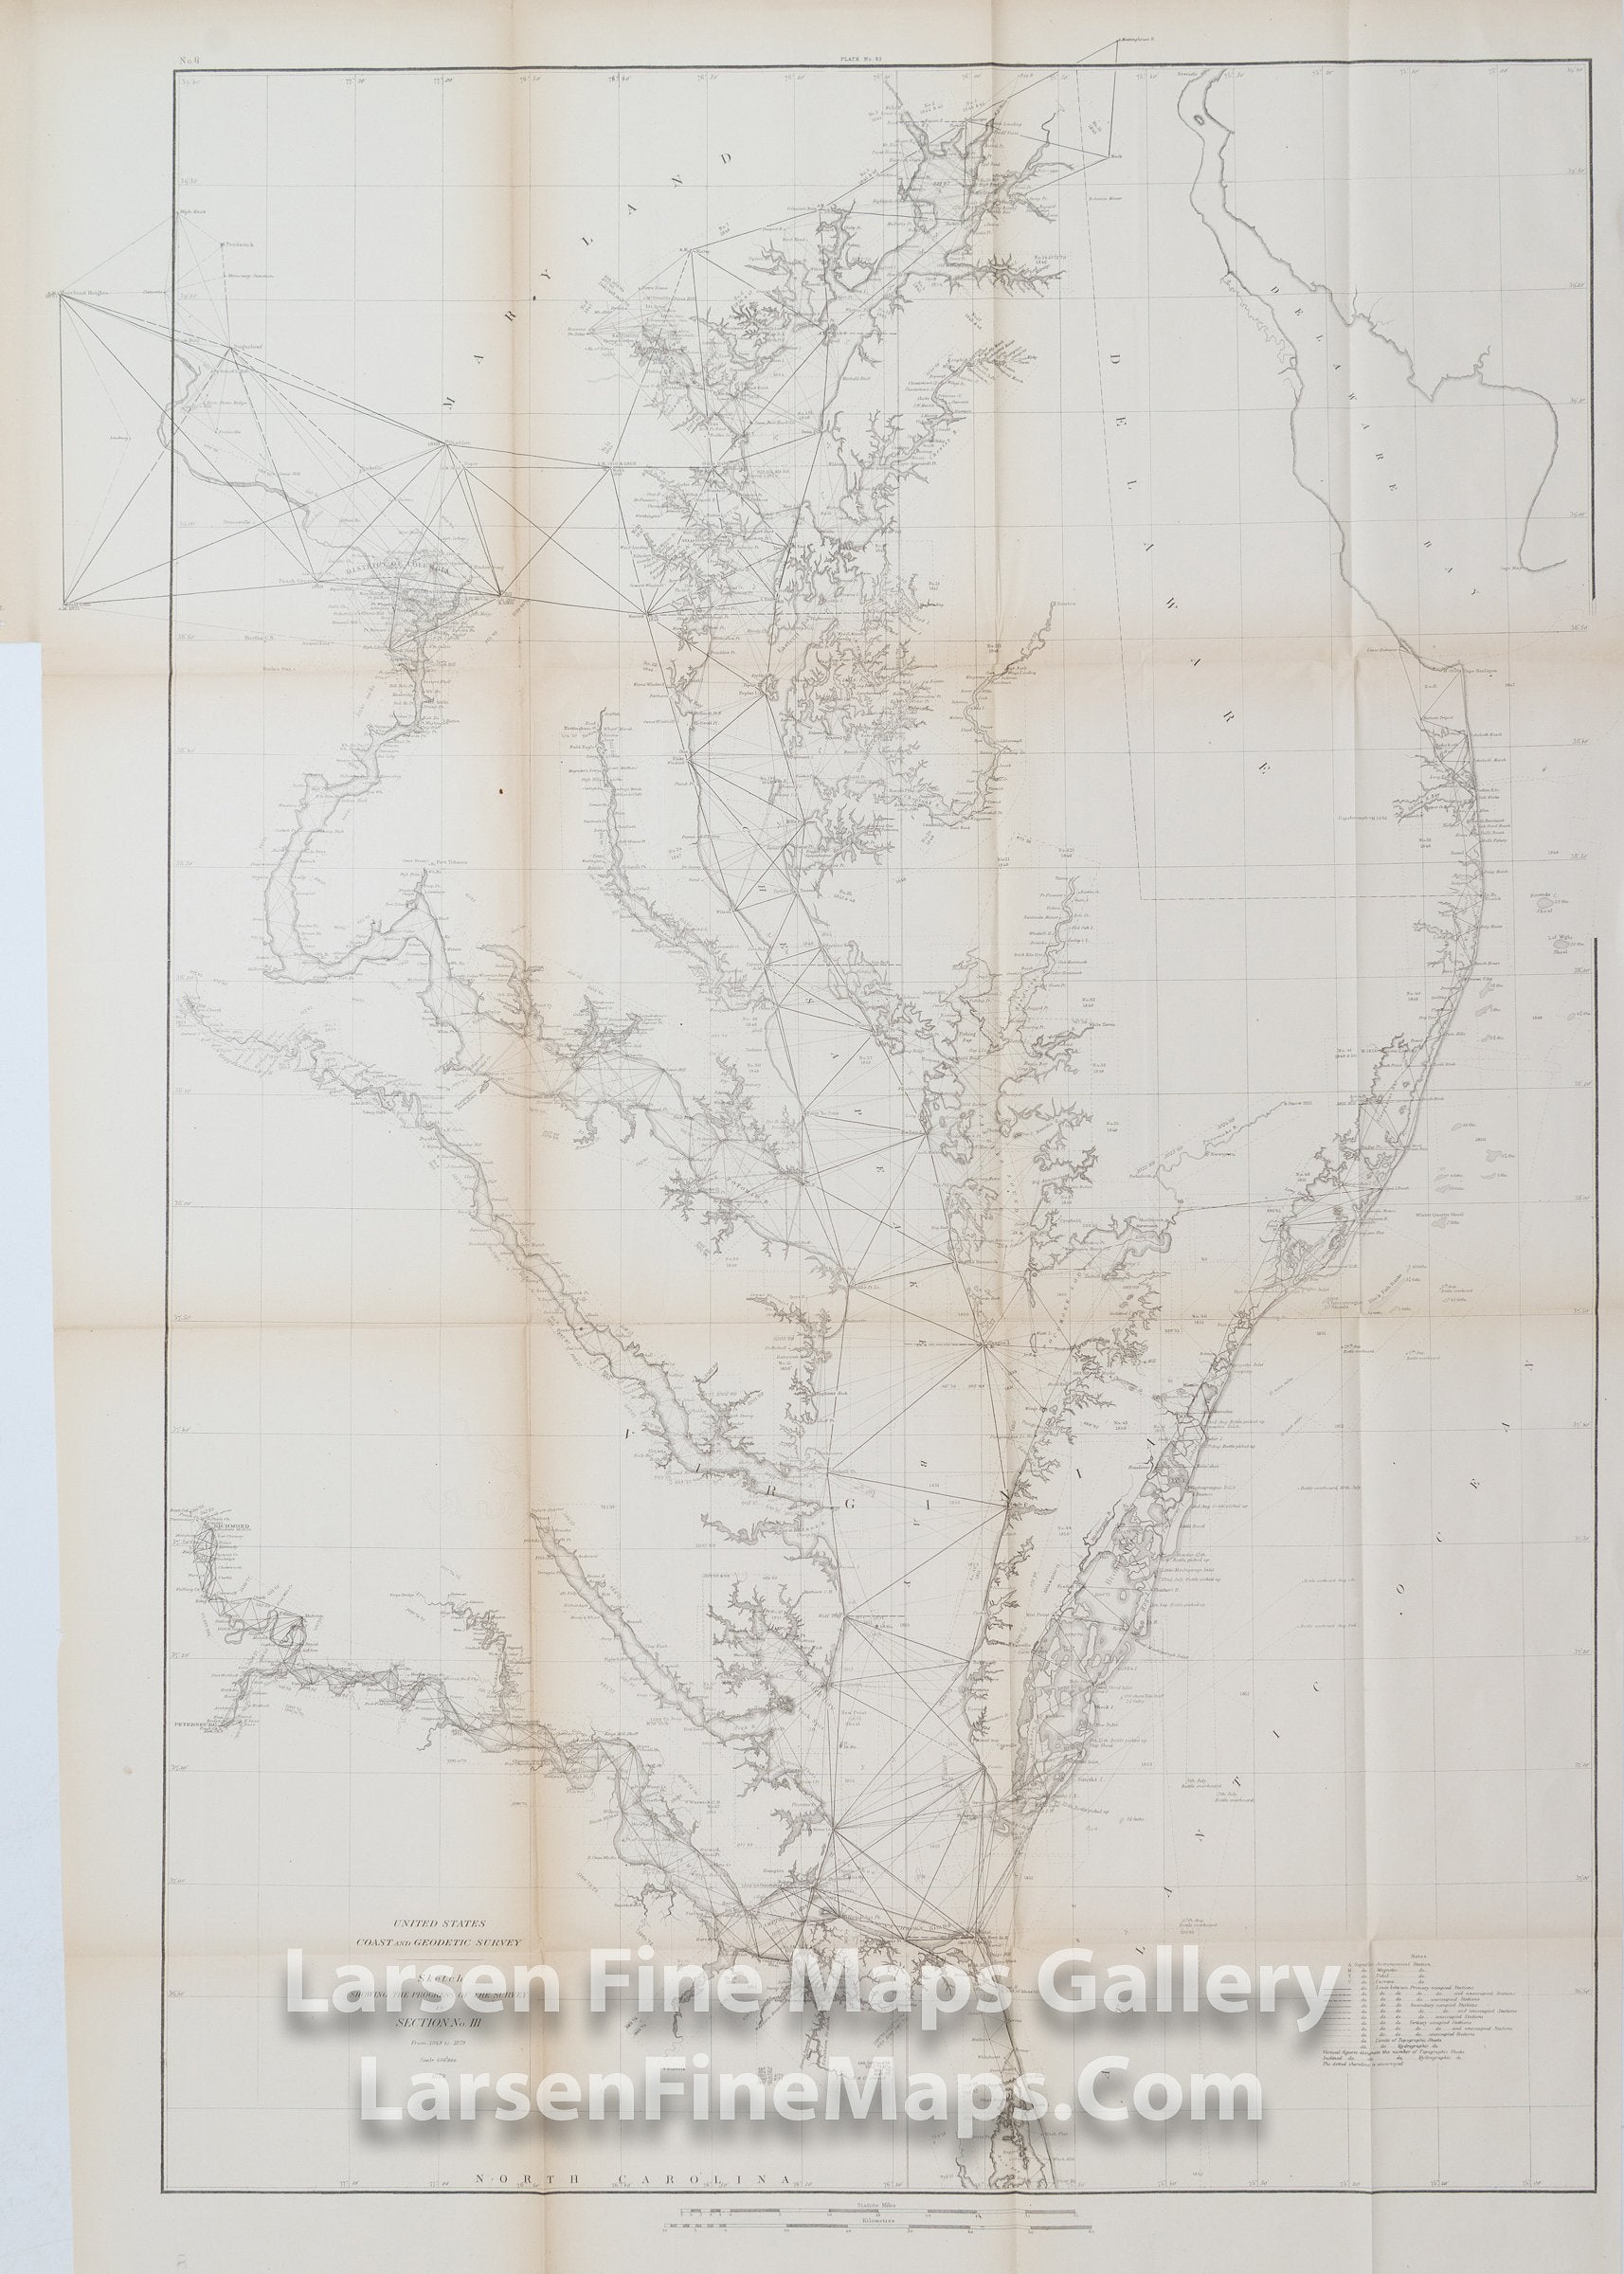 Showing the Progress of the Survey in Section No. III From 1843 to 1879